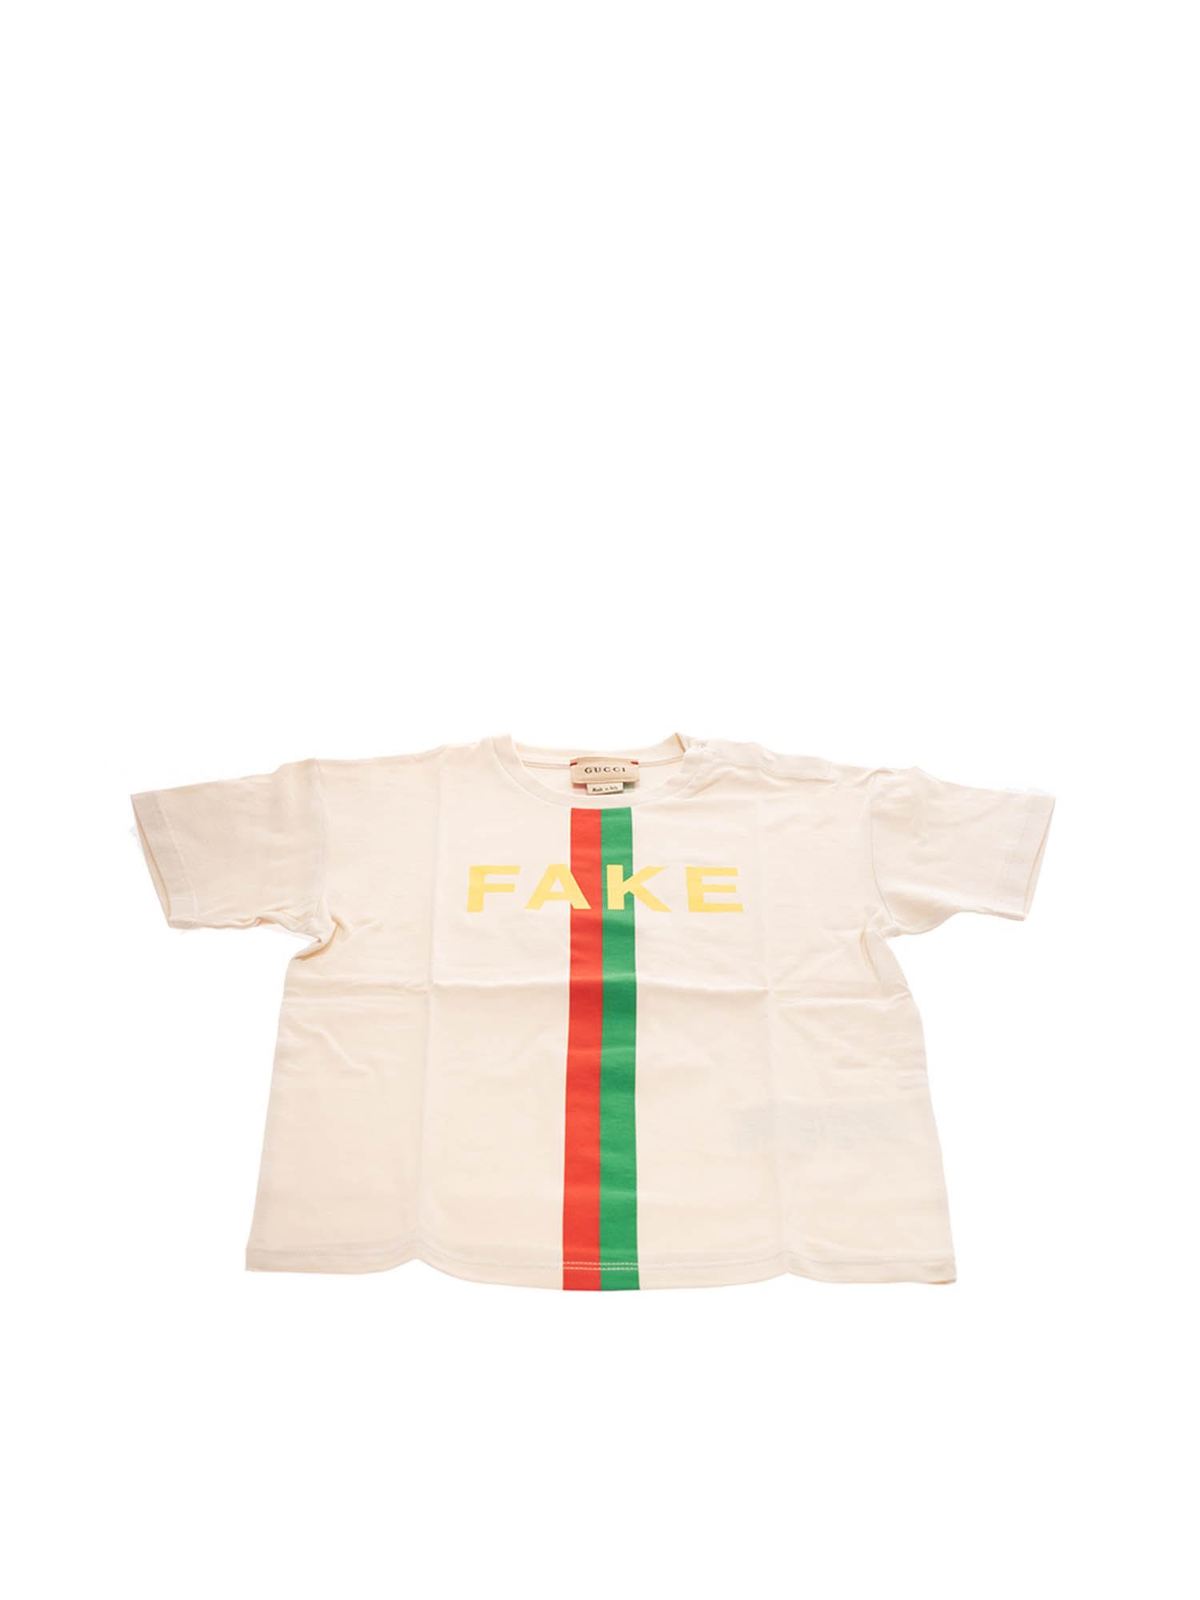 this is not gucci t shirt